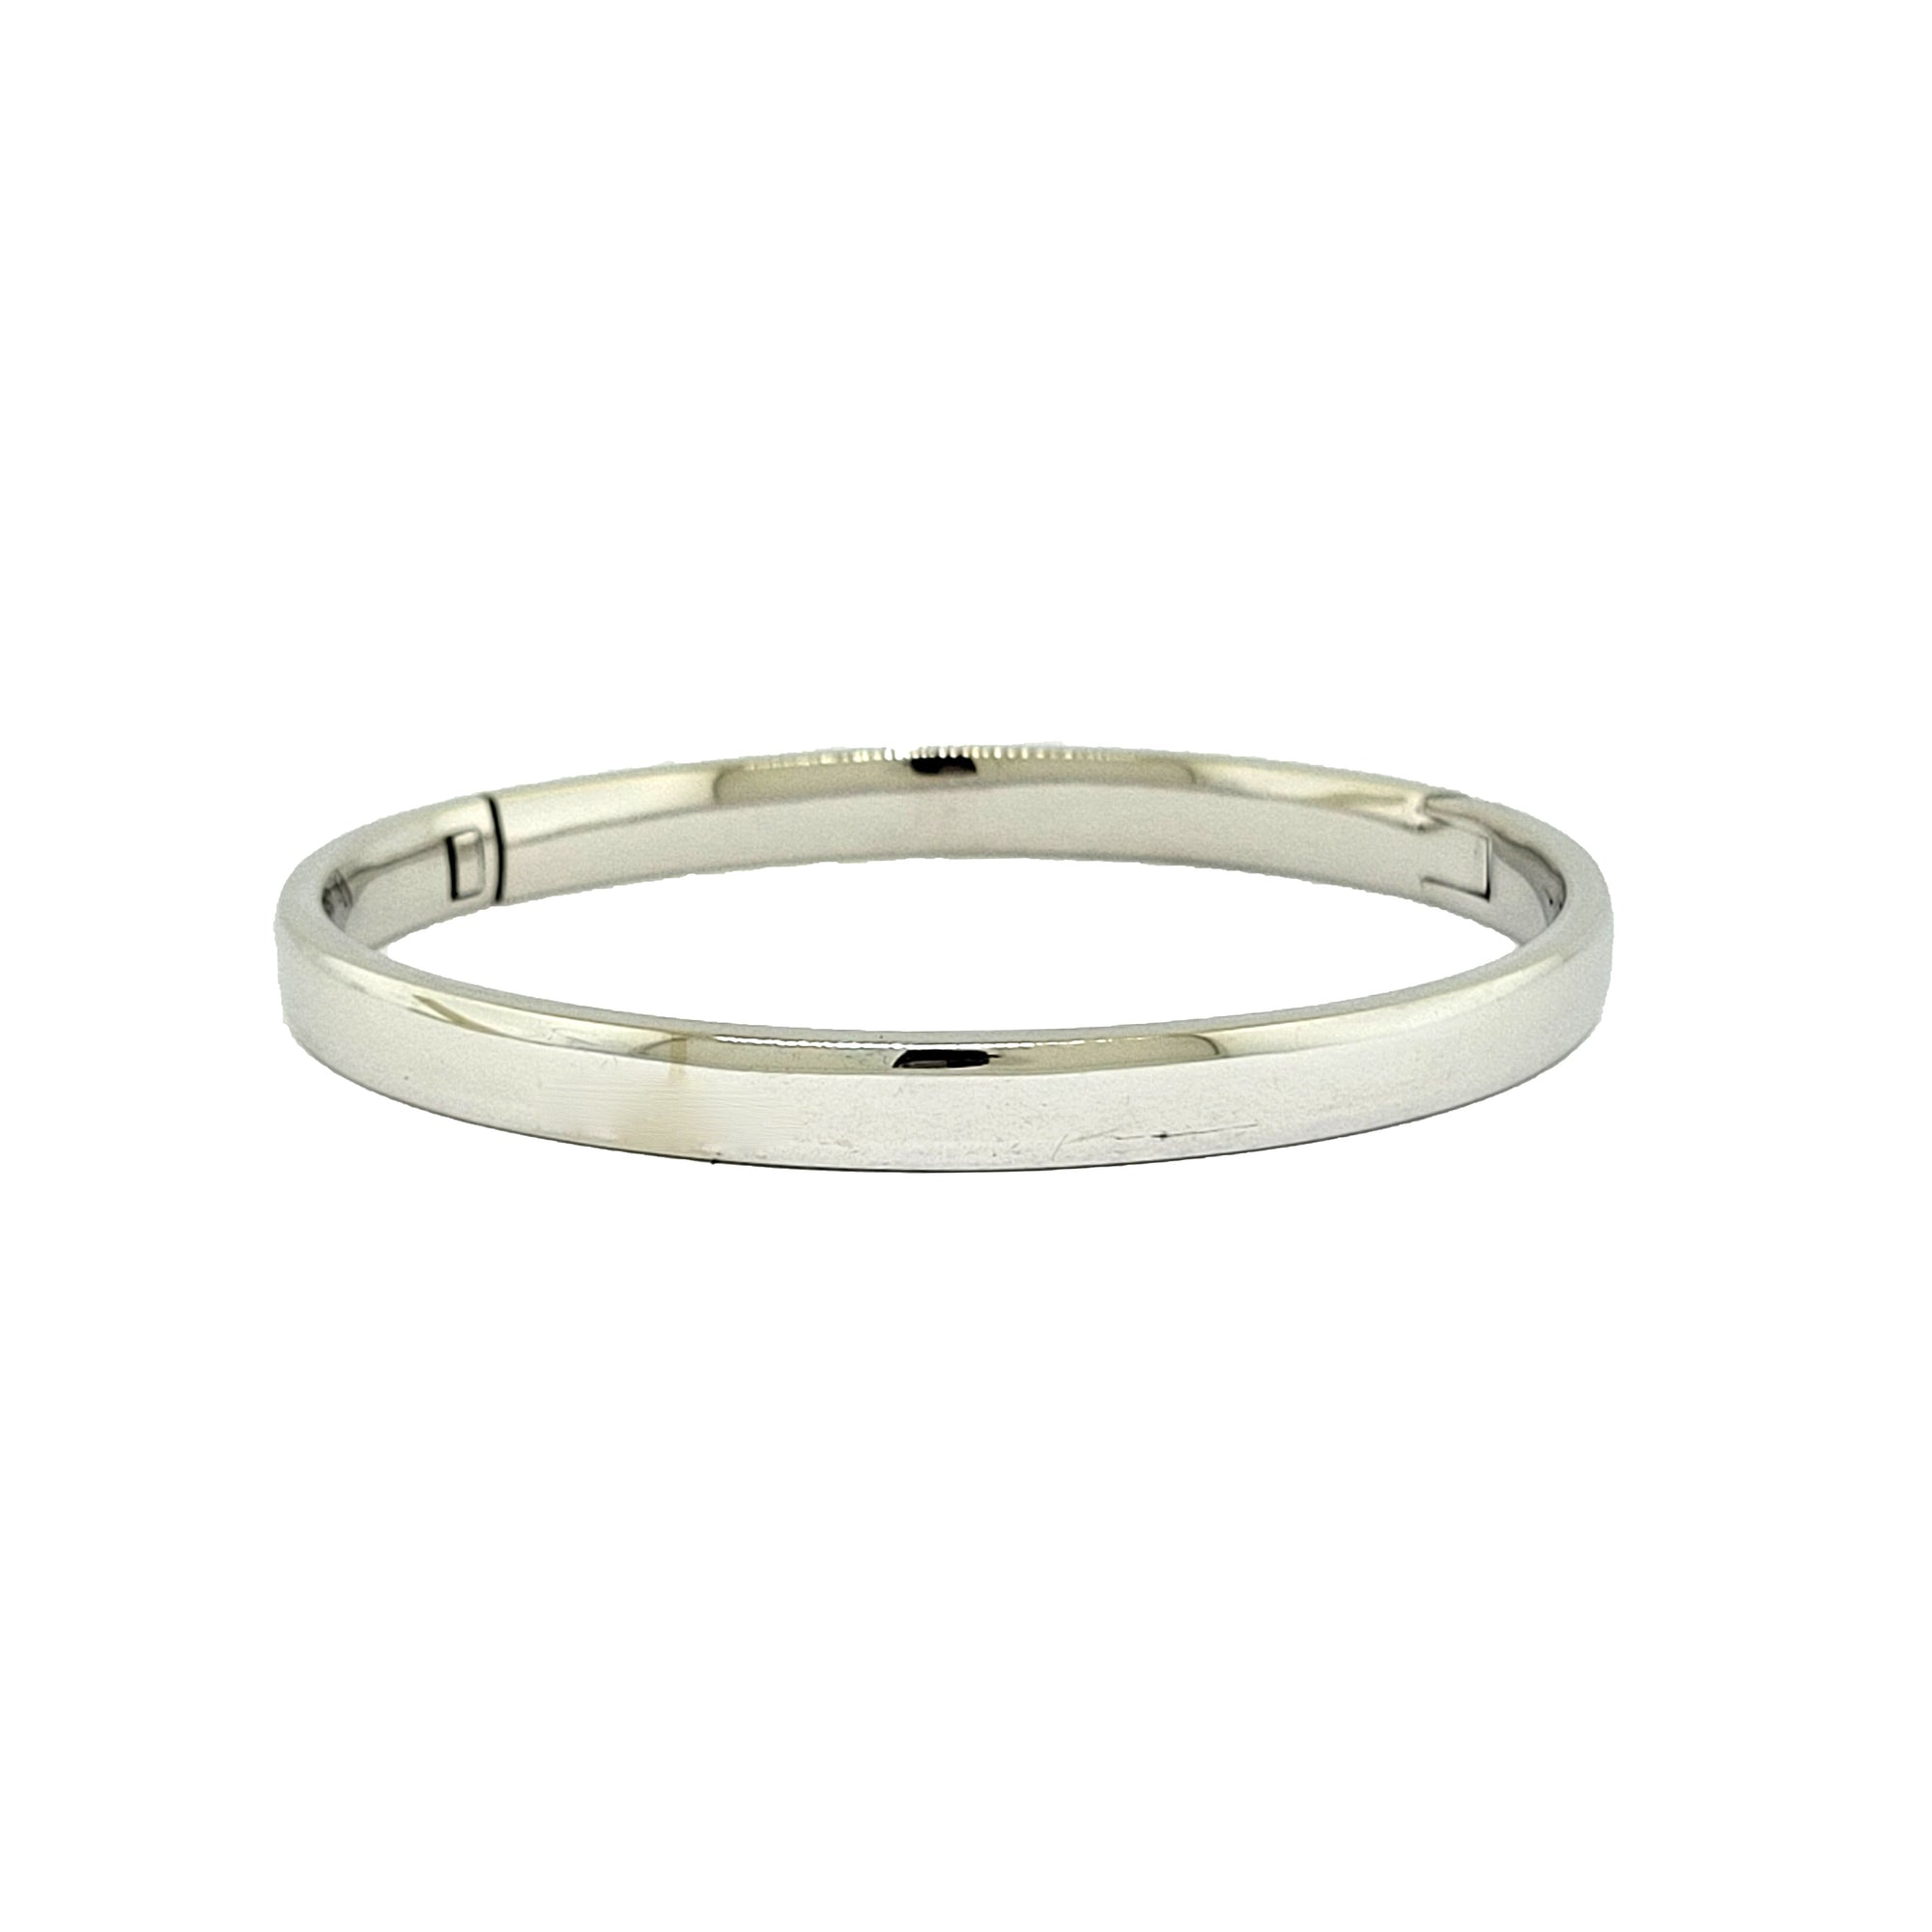 14K W/G Hinged Low Dome Bangle 6mm Wide with a Tension Clasp